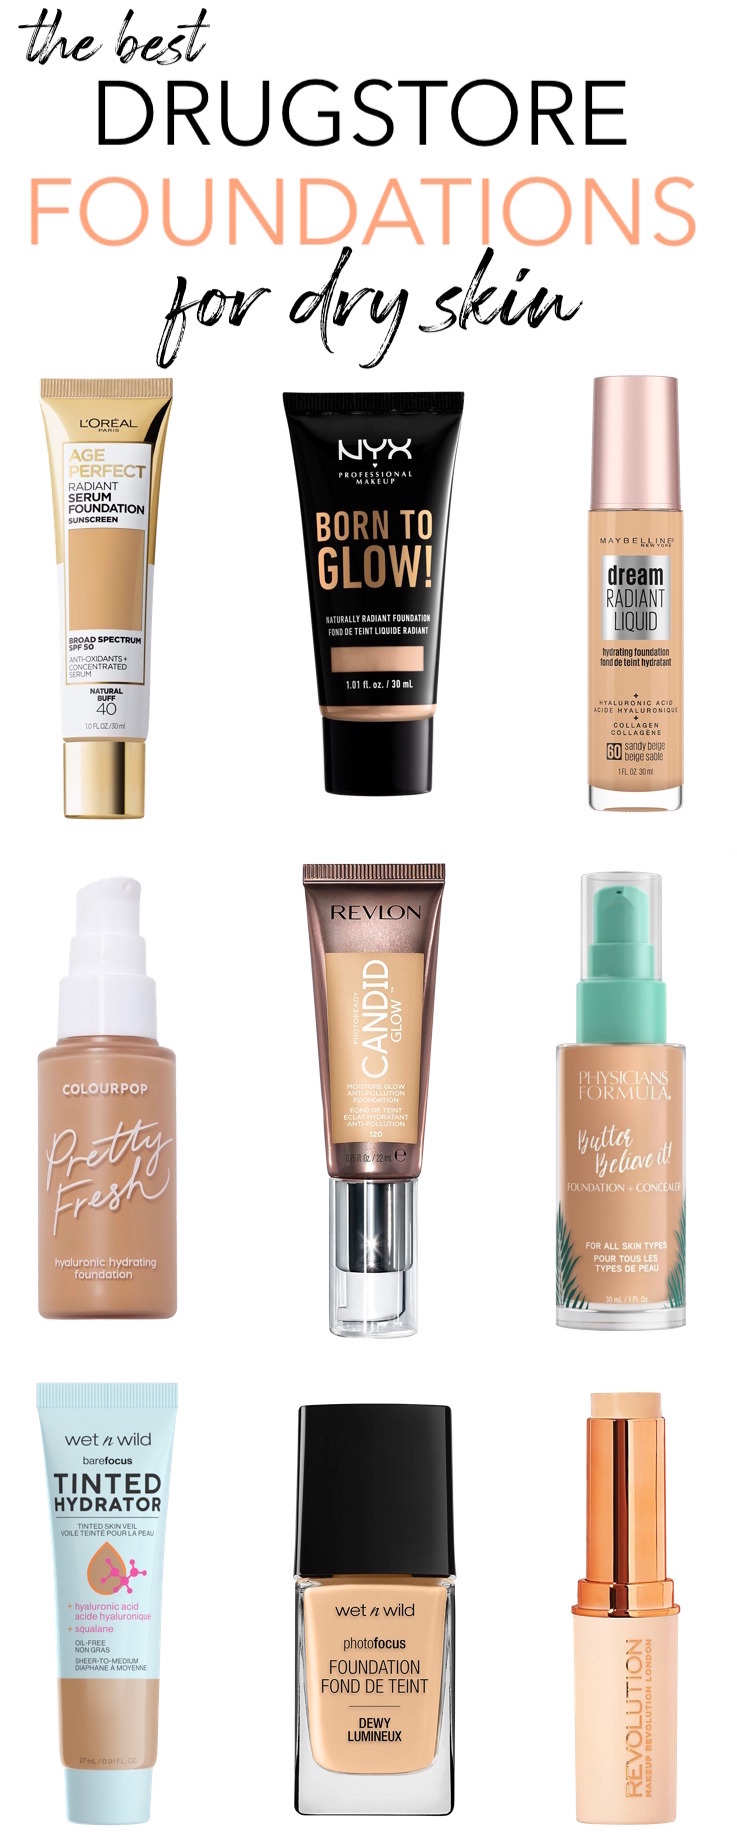 Dealing with dry, dull skin? Here are the best drugstore hydrating foundations for dry skin that give great coverage with a healthy, dewy glow! 